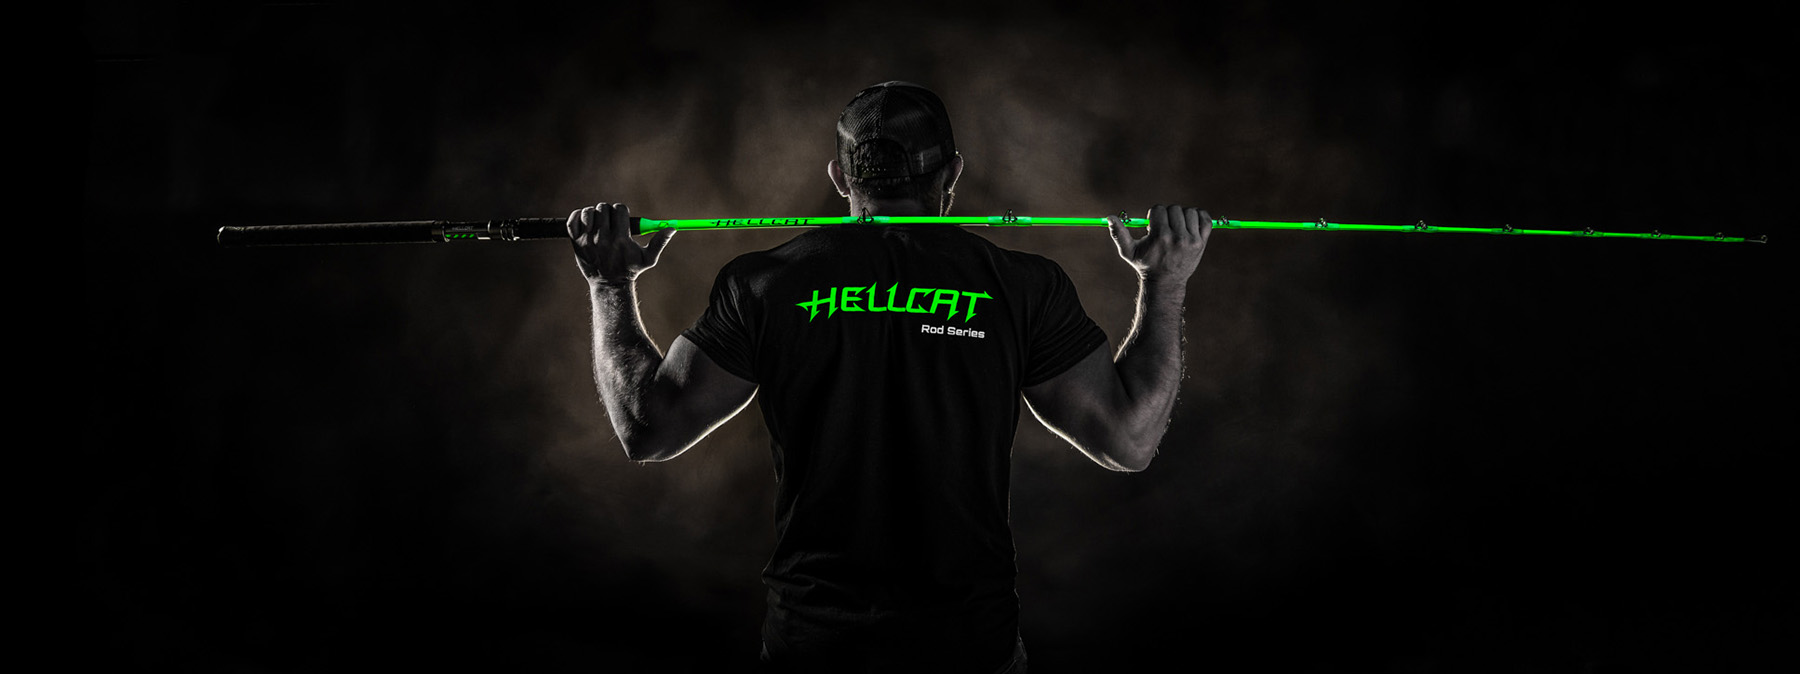 The Hellcat Fishing Rod: Features, Performance, and Angler Reviews